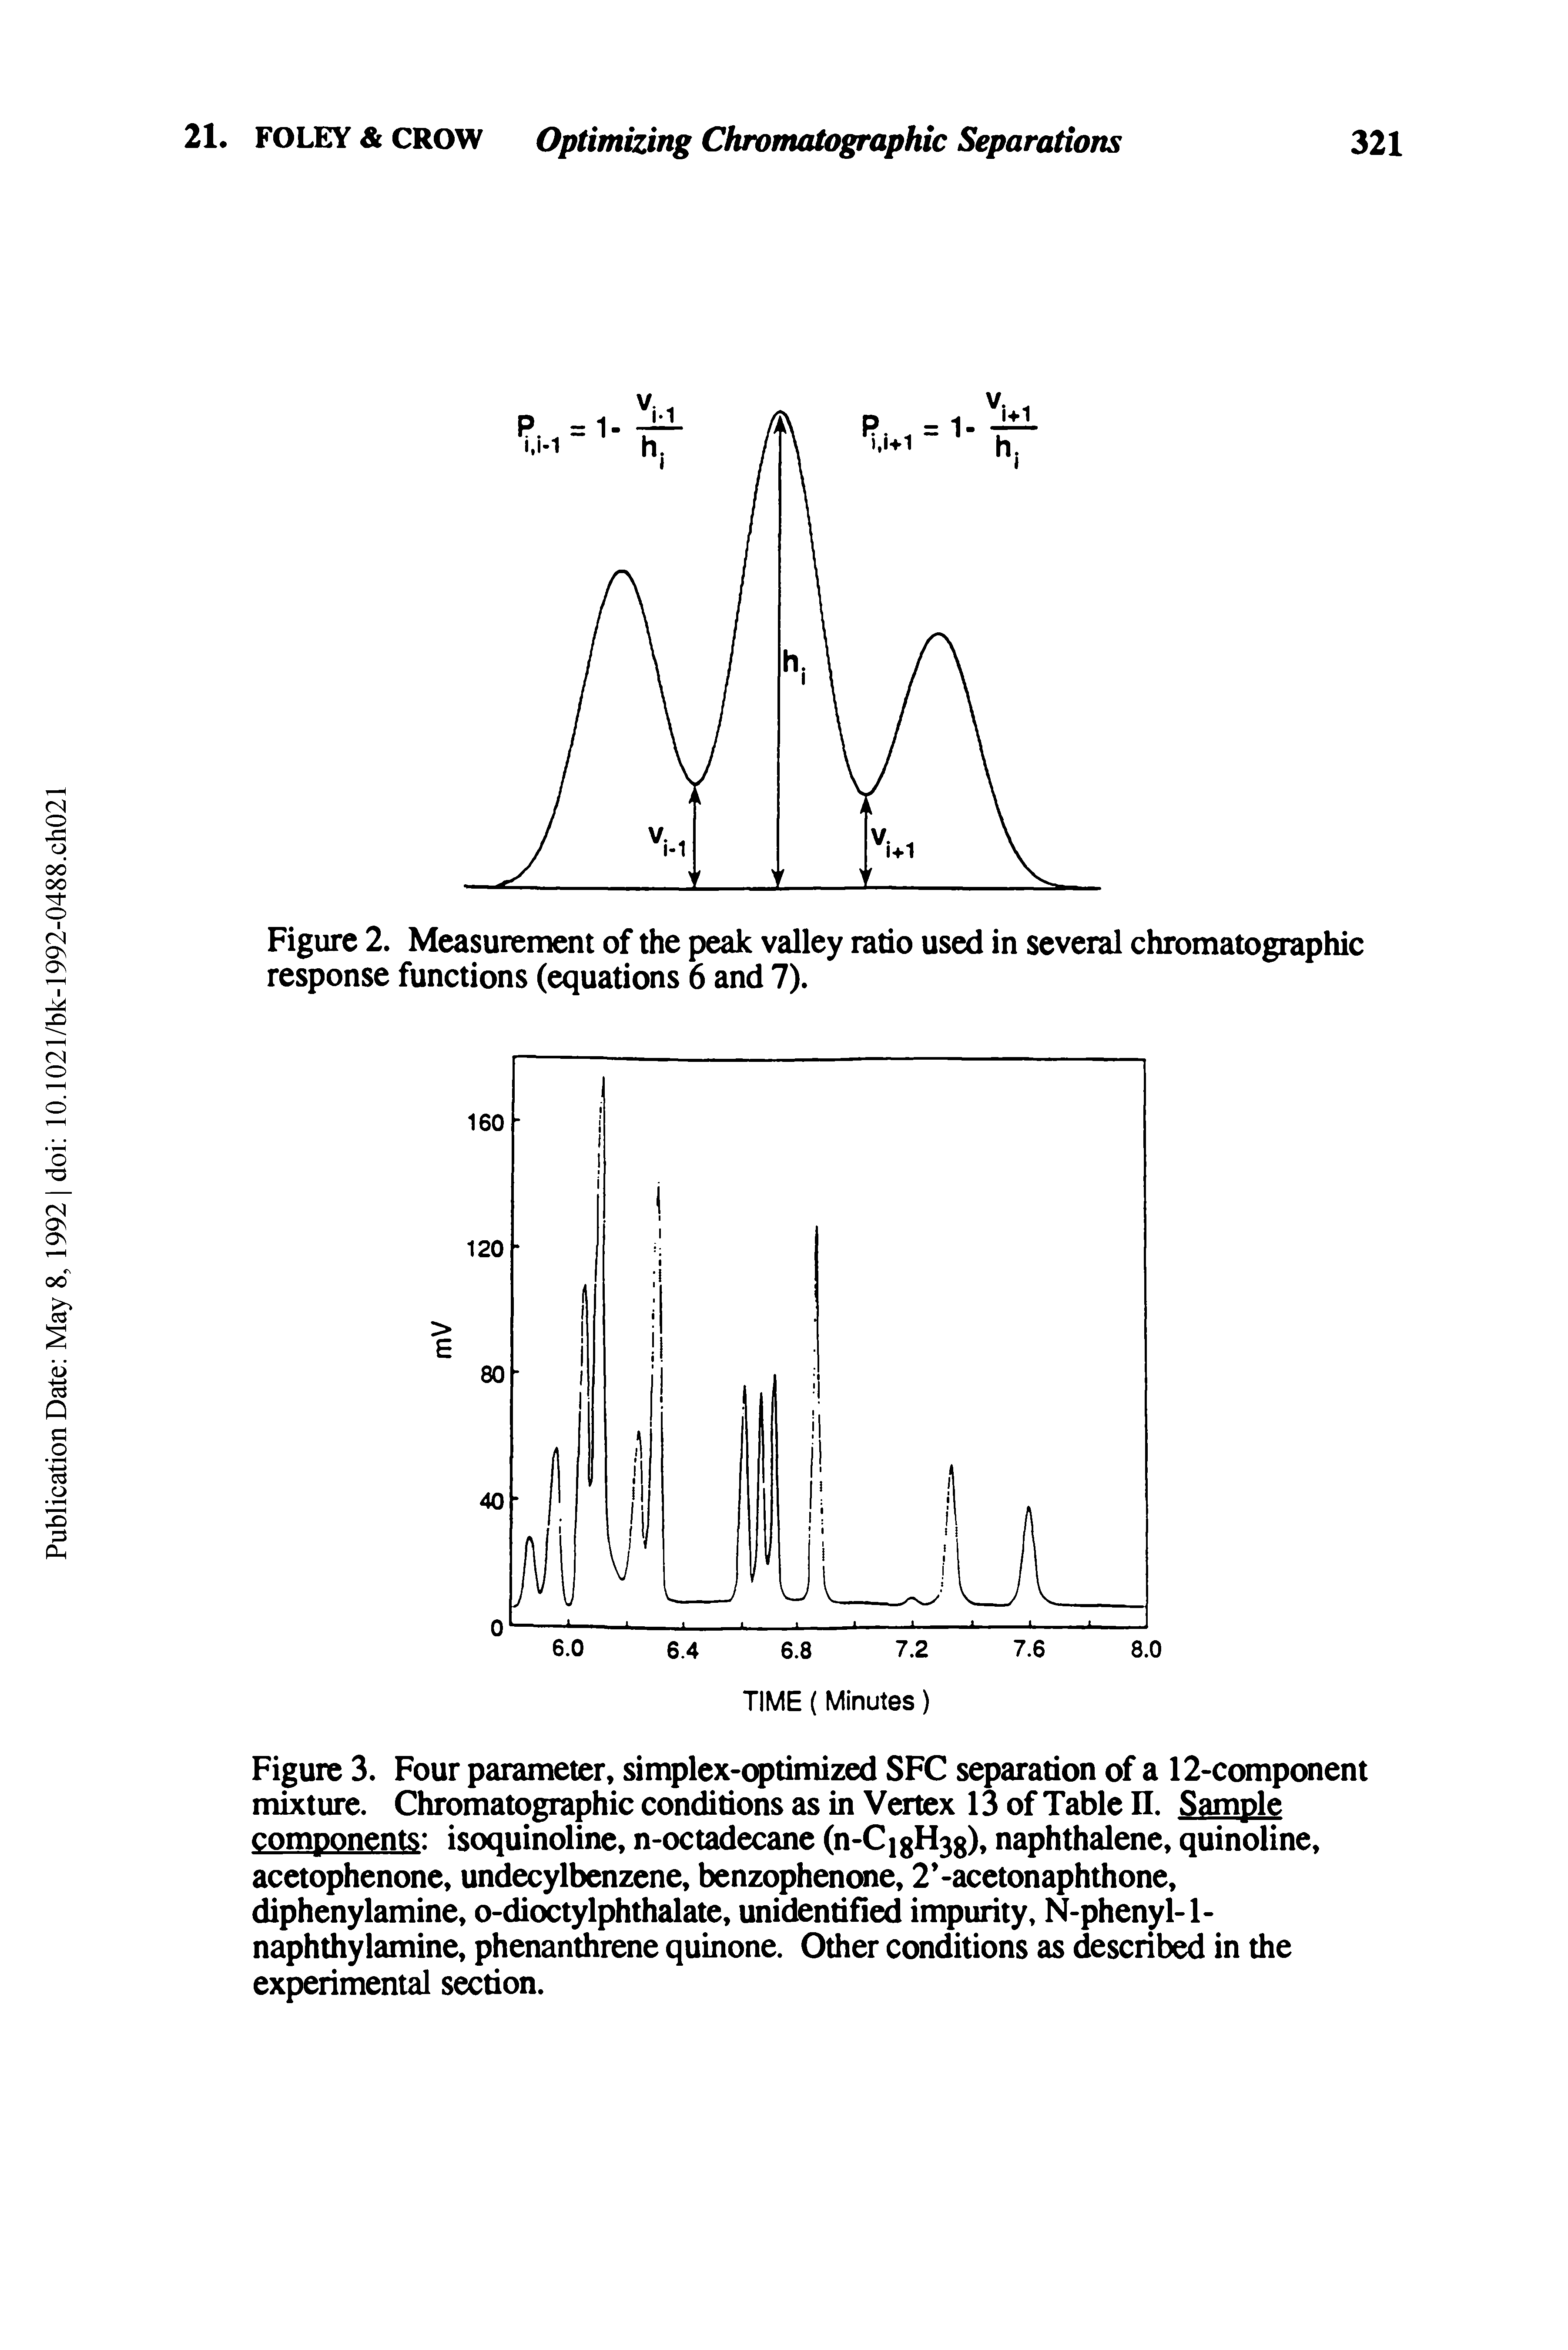 Figure 2. Measurement of the peak valley ratio used in several chromatographic response functions (equations 6 and 7).